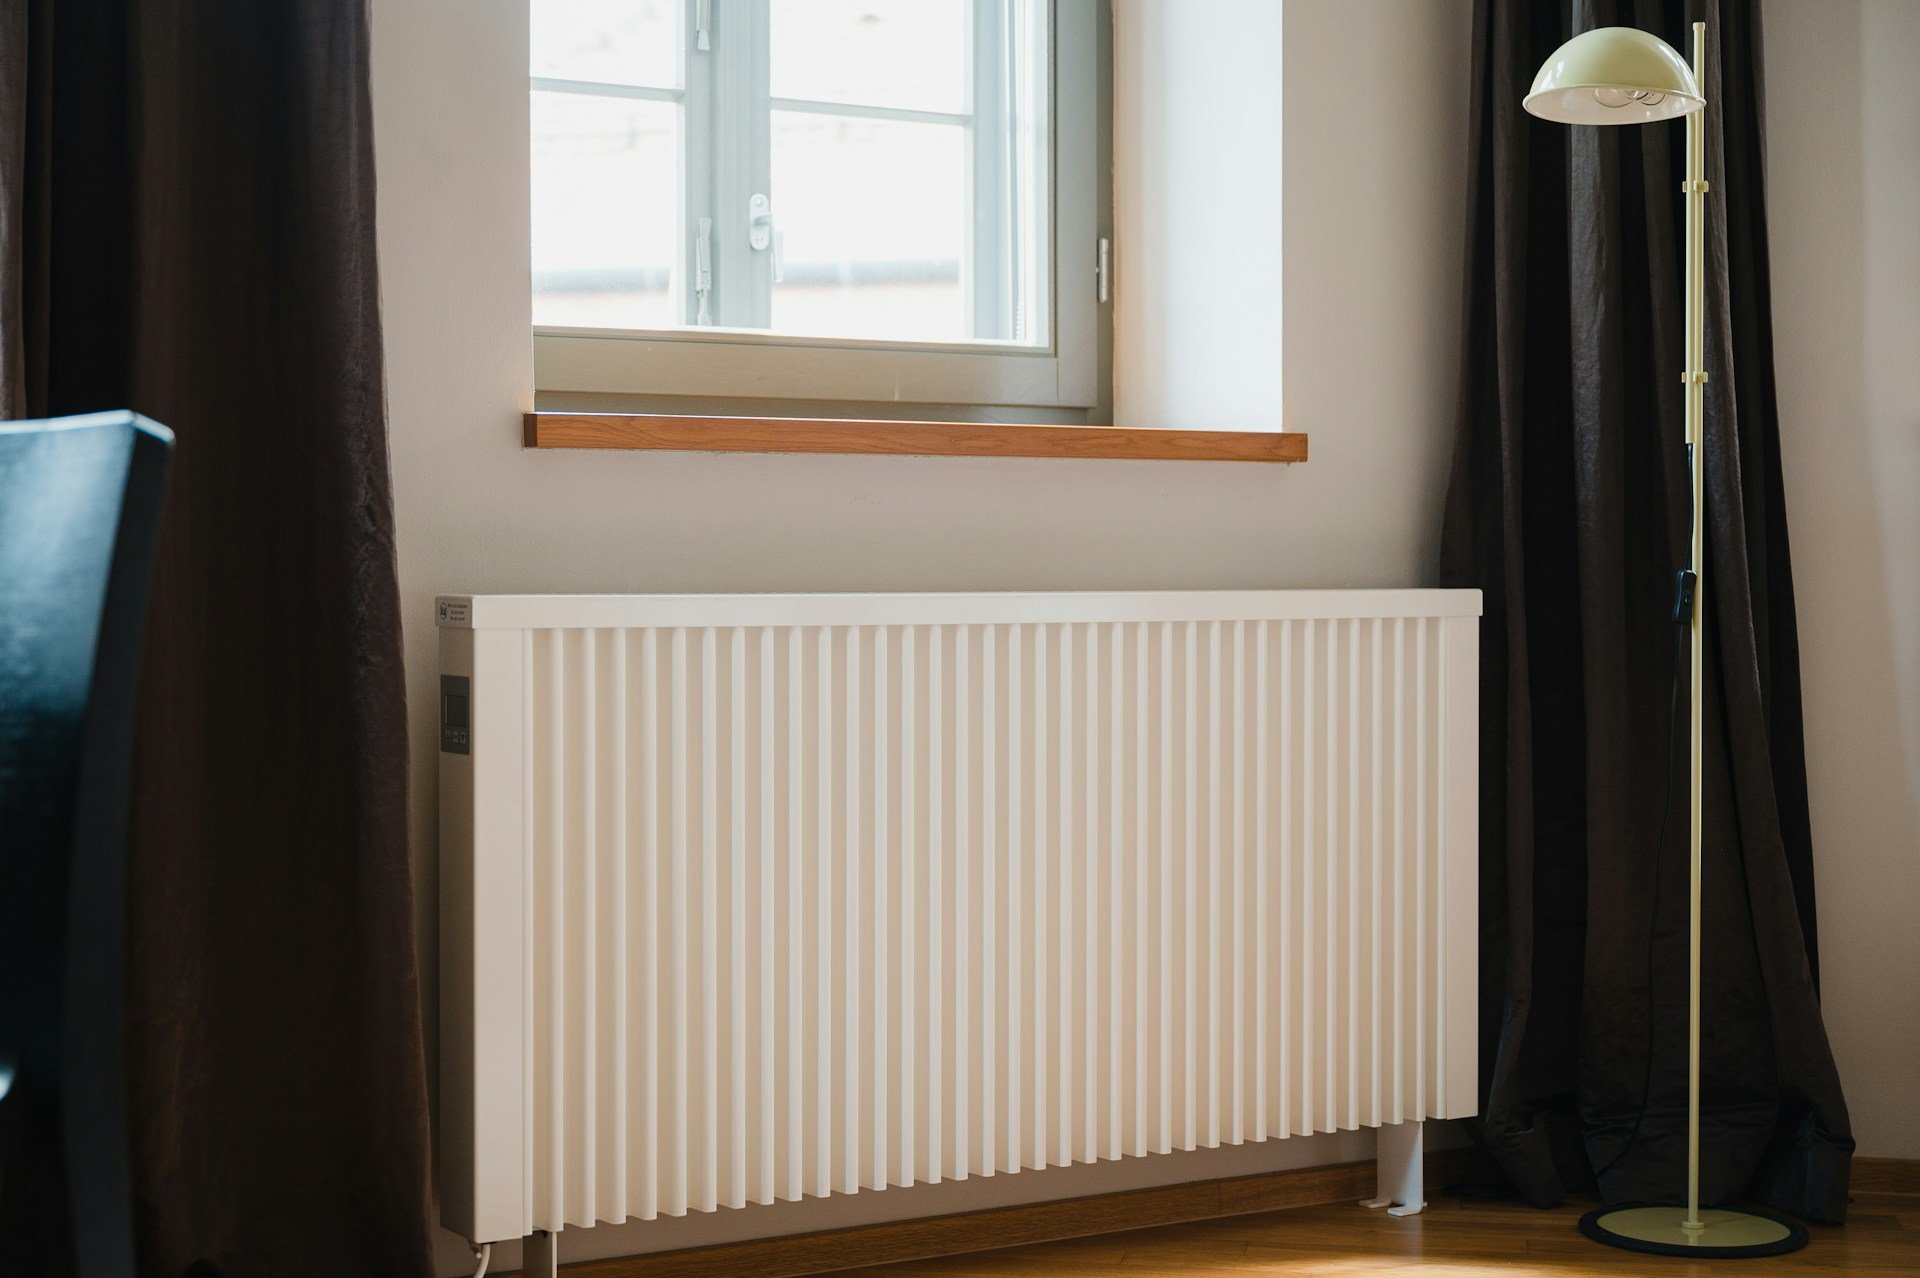 Temperature Troubles: Signs Your Heater Needs Professional Help